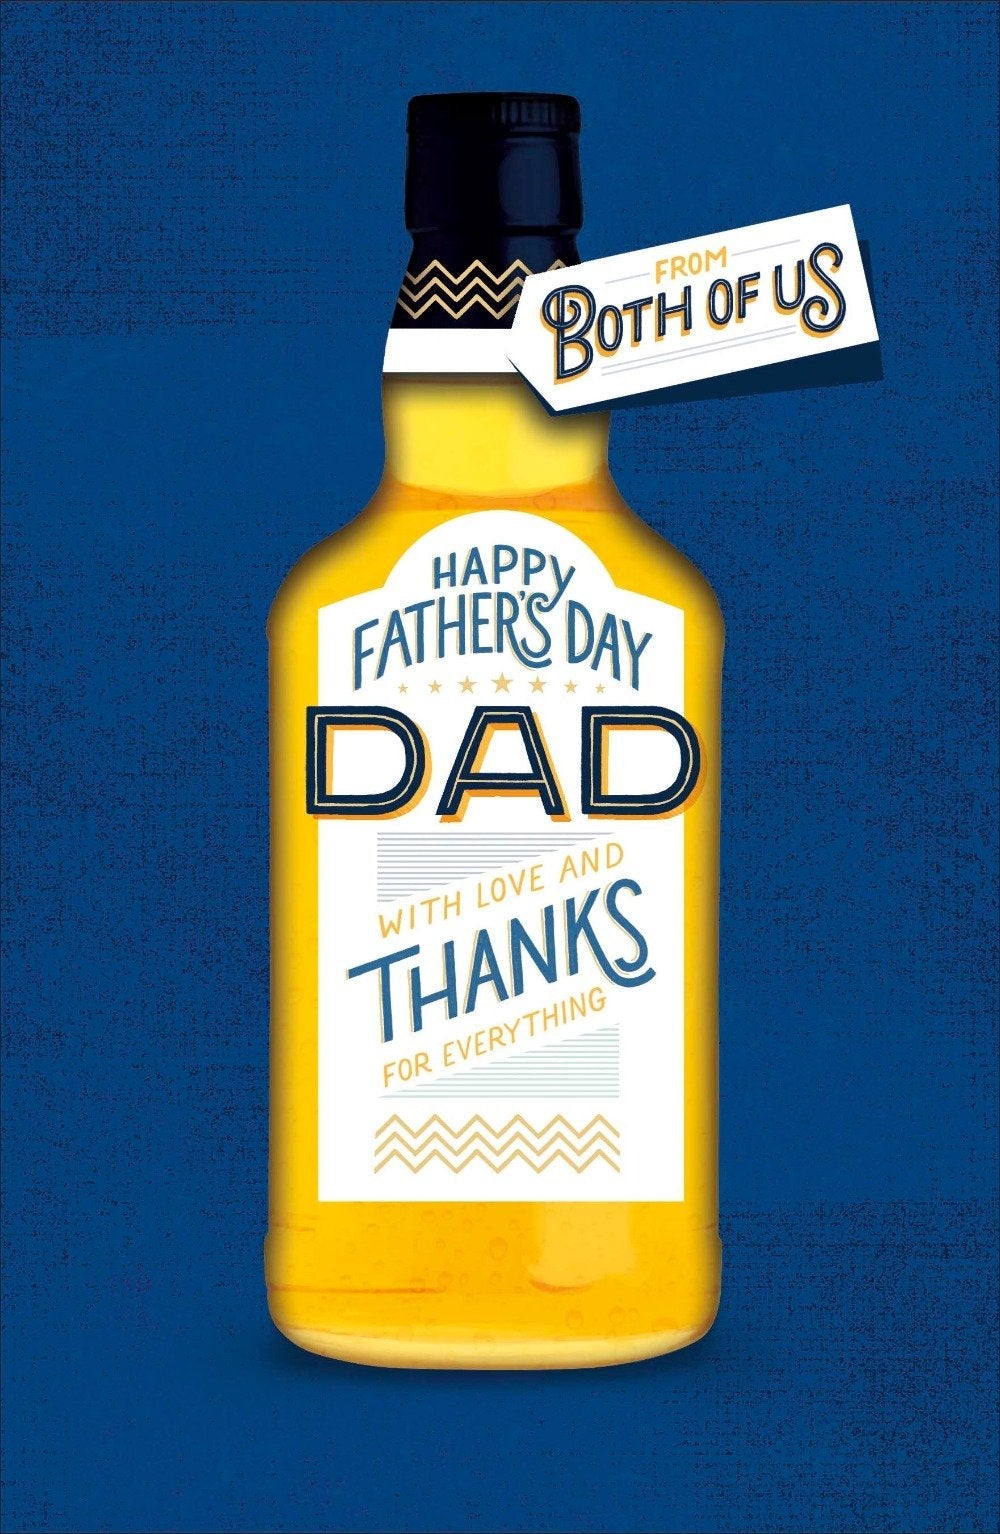 Fathers Day Card - Dad From Both Of Us / A Bottle Of Beer On A Blue Front